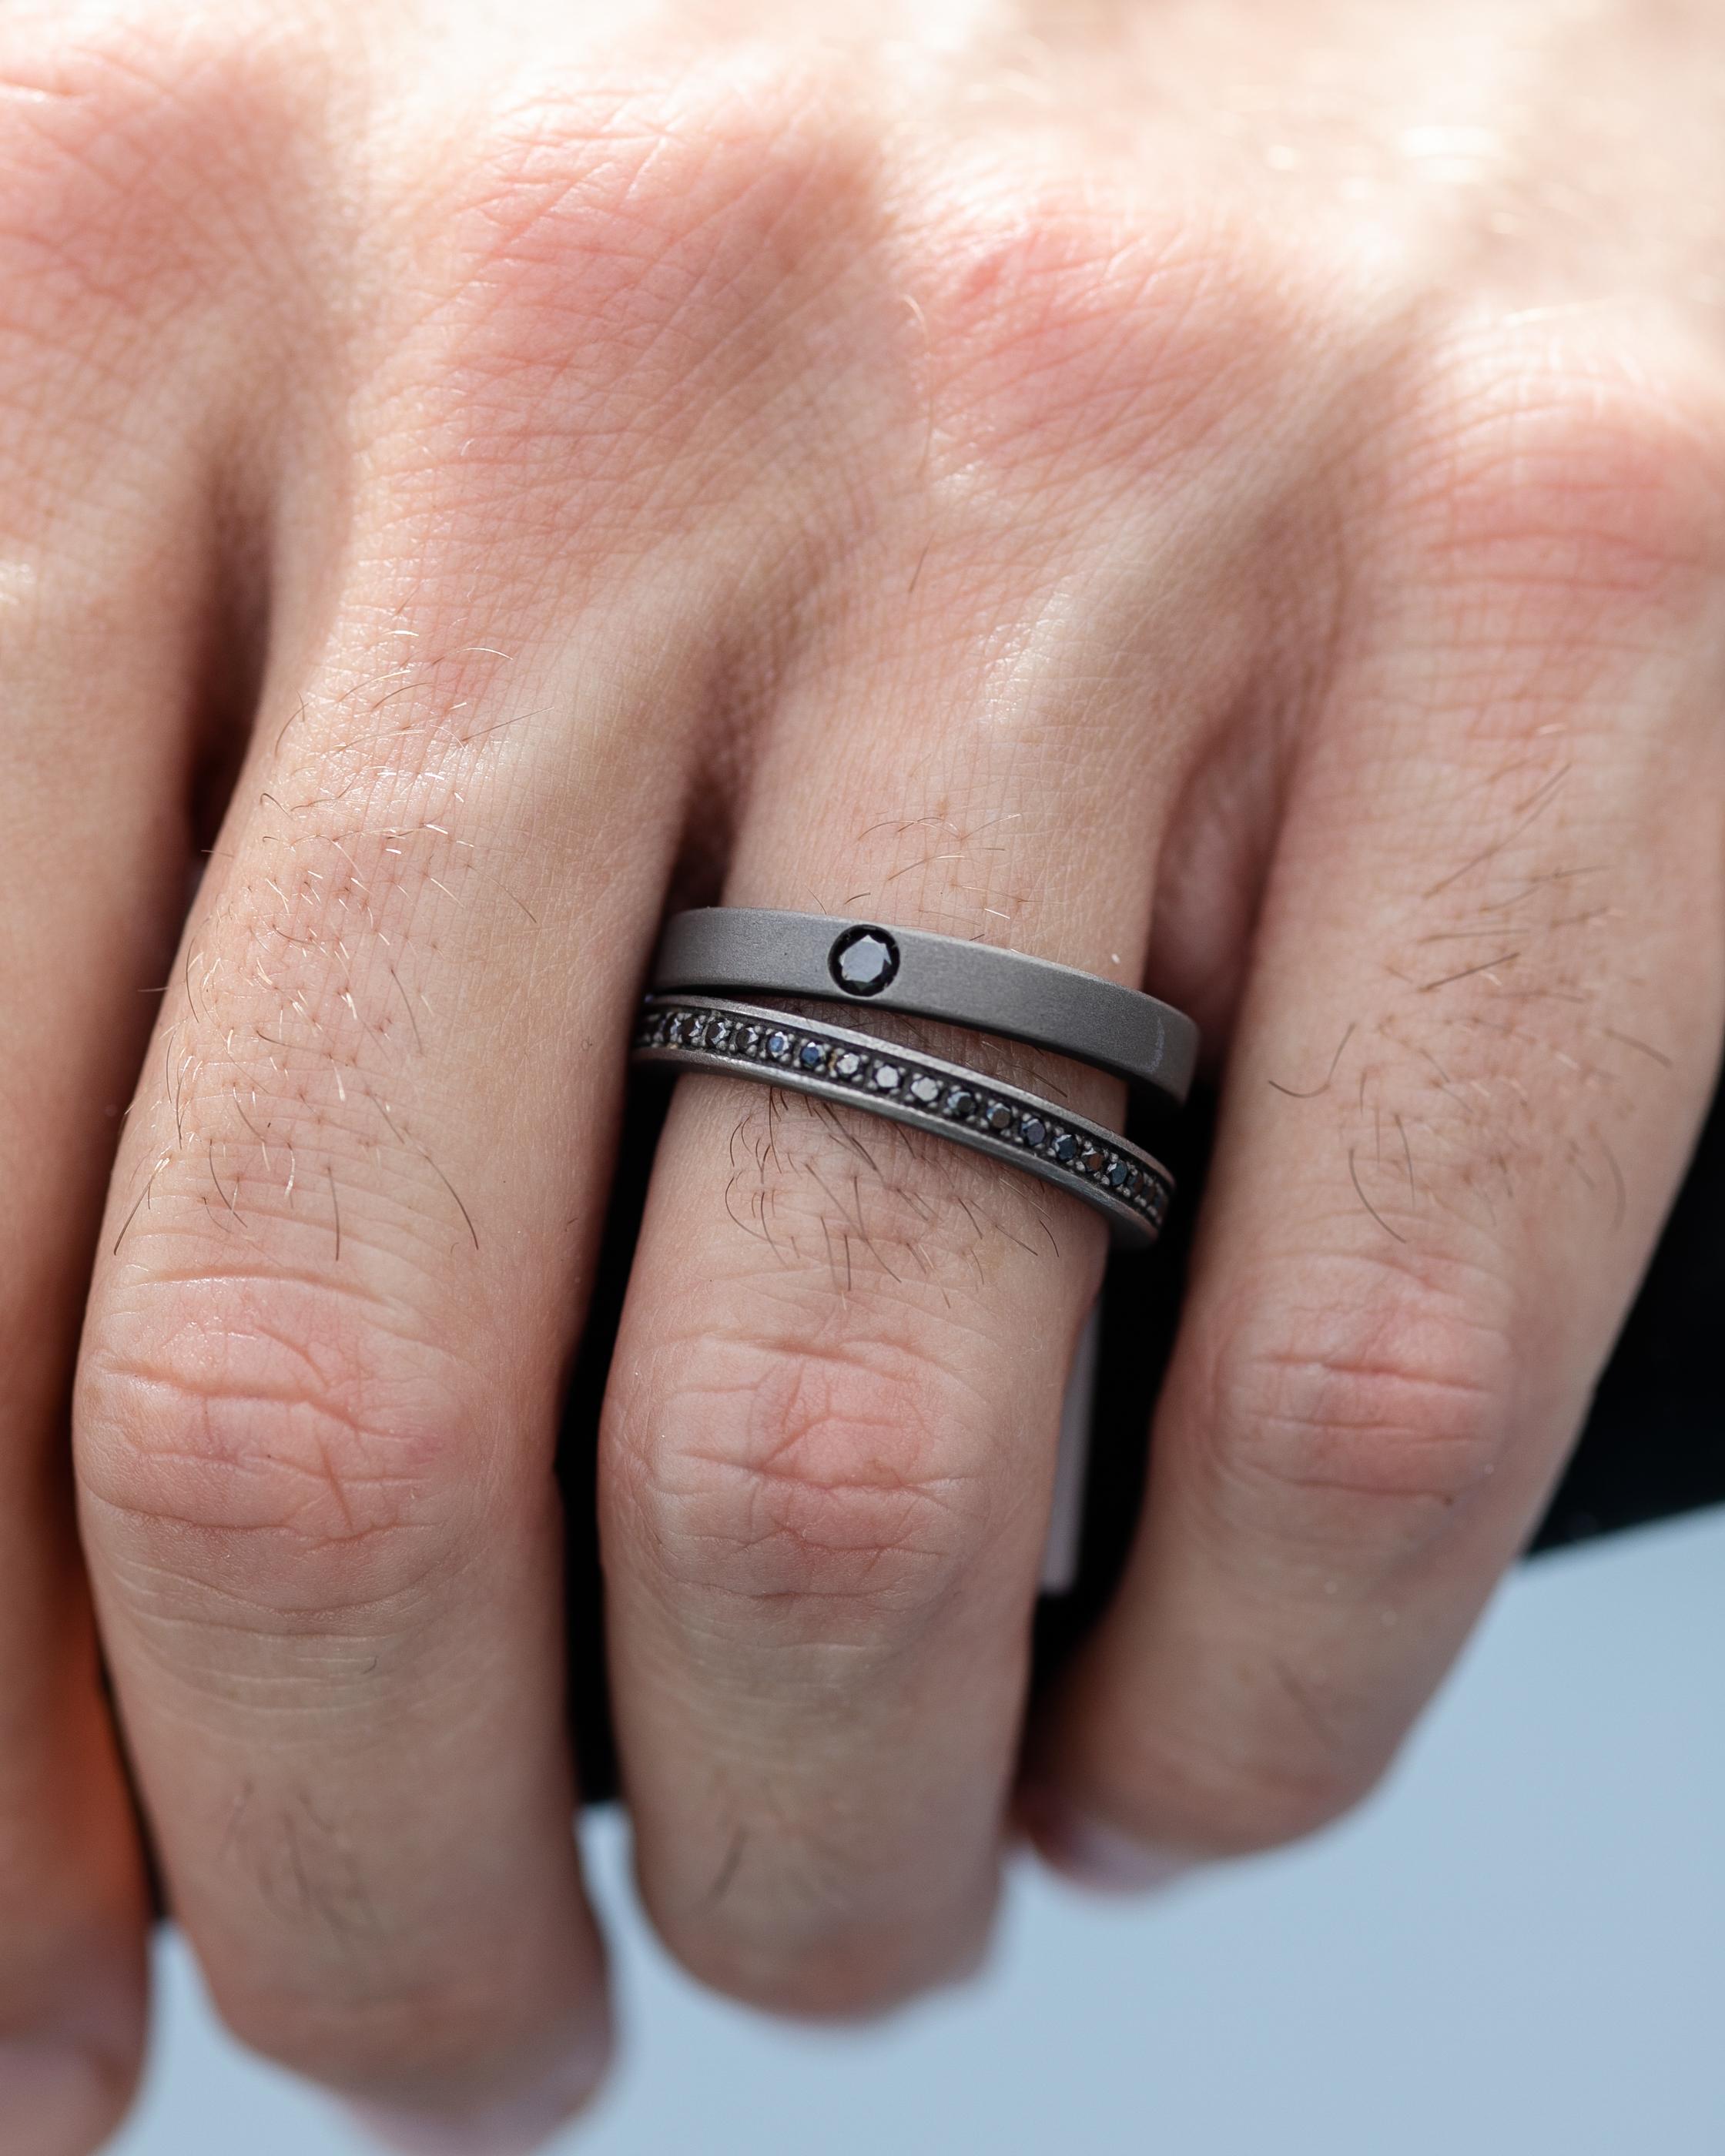 Titanium band ring is from our Men's Collection. This masculine ring is decorated by round black diamond in total of 0.1 Carat The band is 0.3cm wide. Perfect for masculine look!

The men’s collection is a collection of jewelry inspired by the world